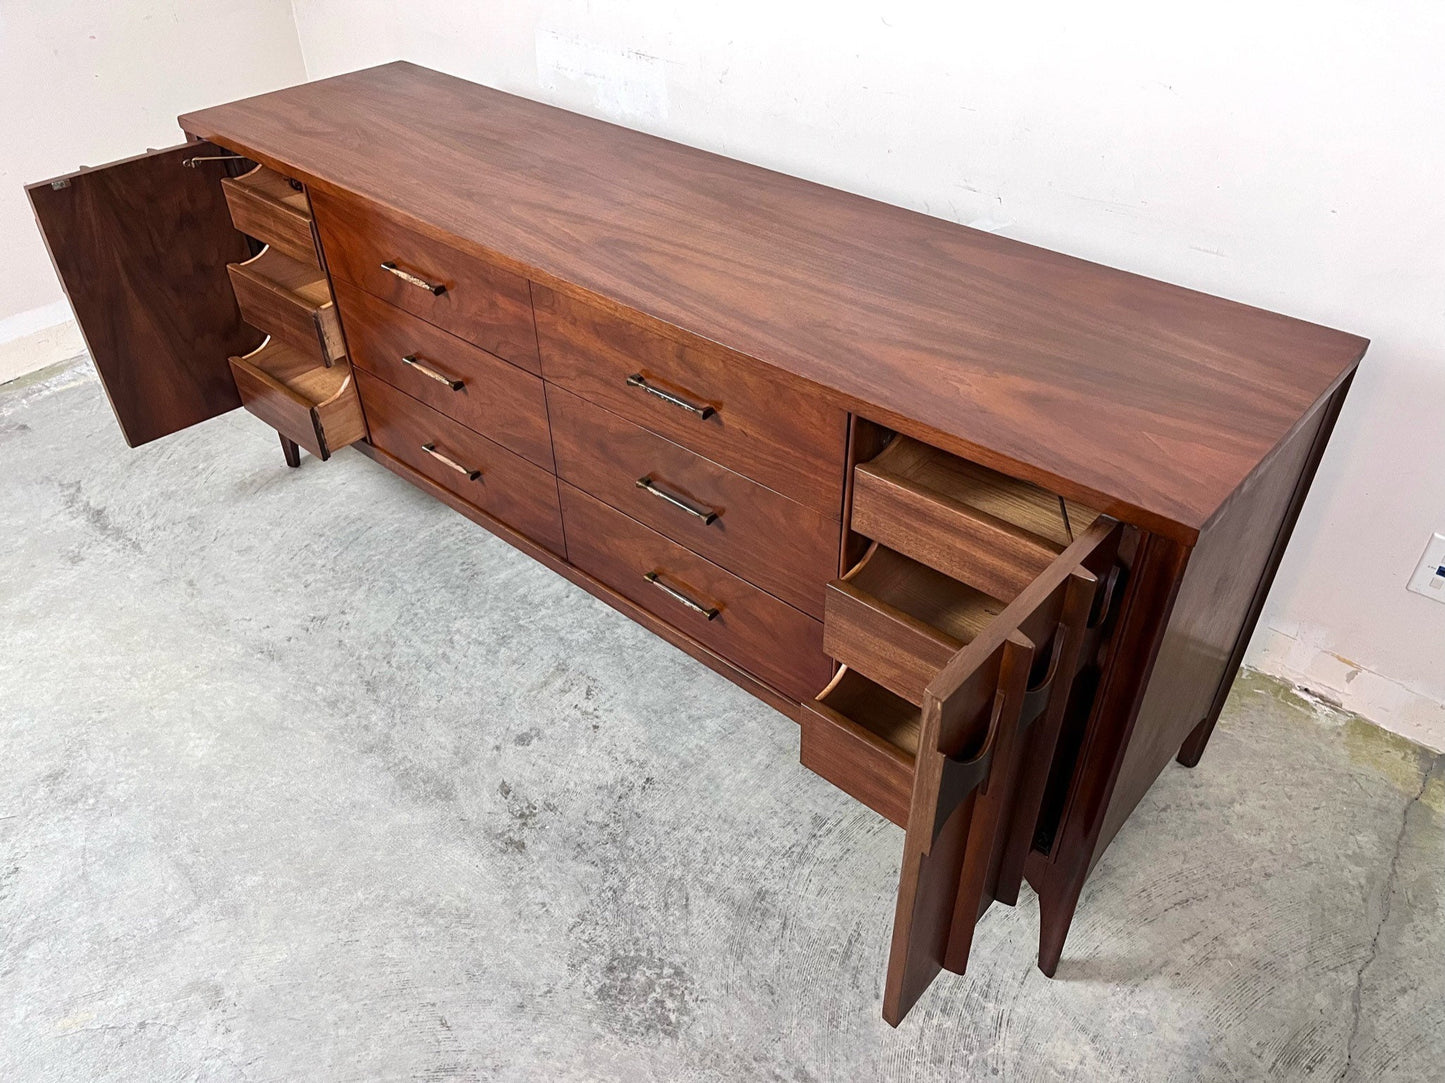 Vintage Kent Coffey Perspecta dresser made in the USA with high-quality craftsmanship